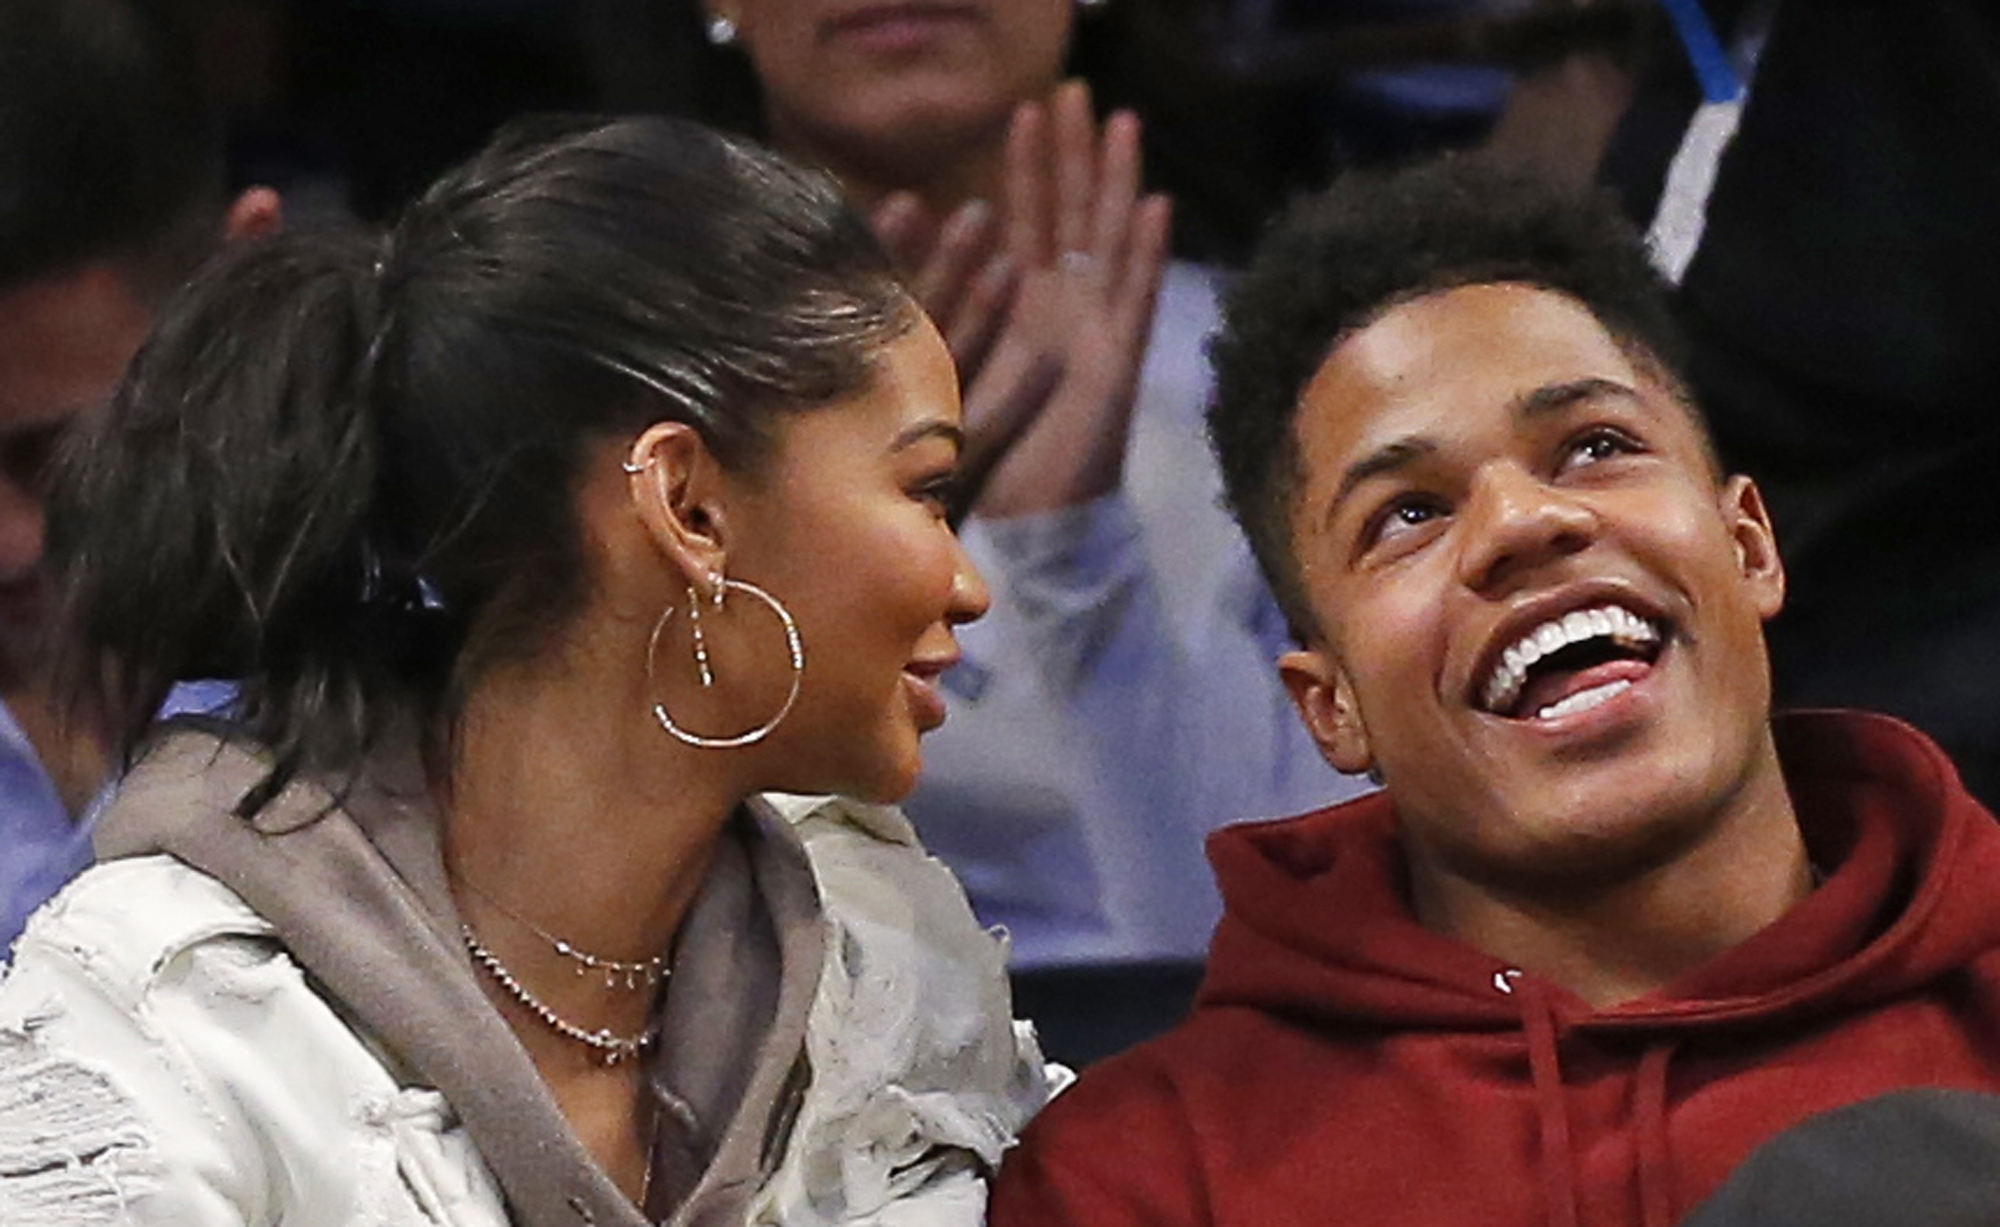 Divorce details emerge in Giants' Sterling Shepard's separation from model  wife Chanel Iman 